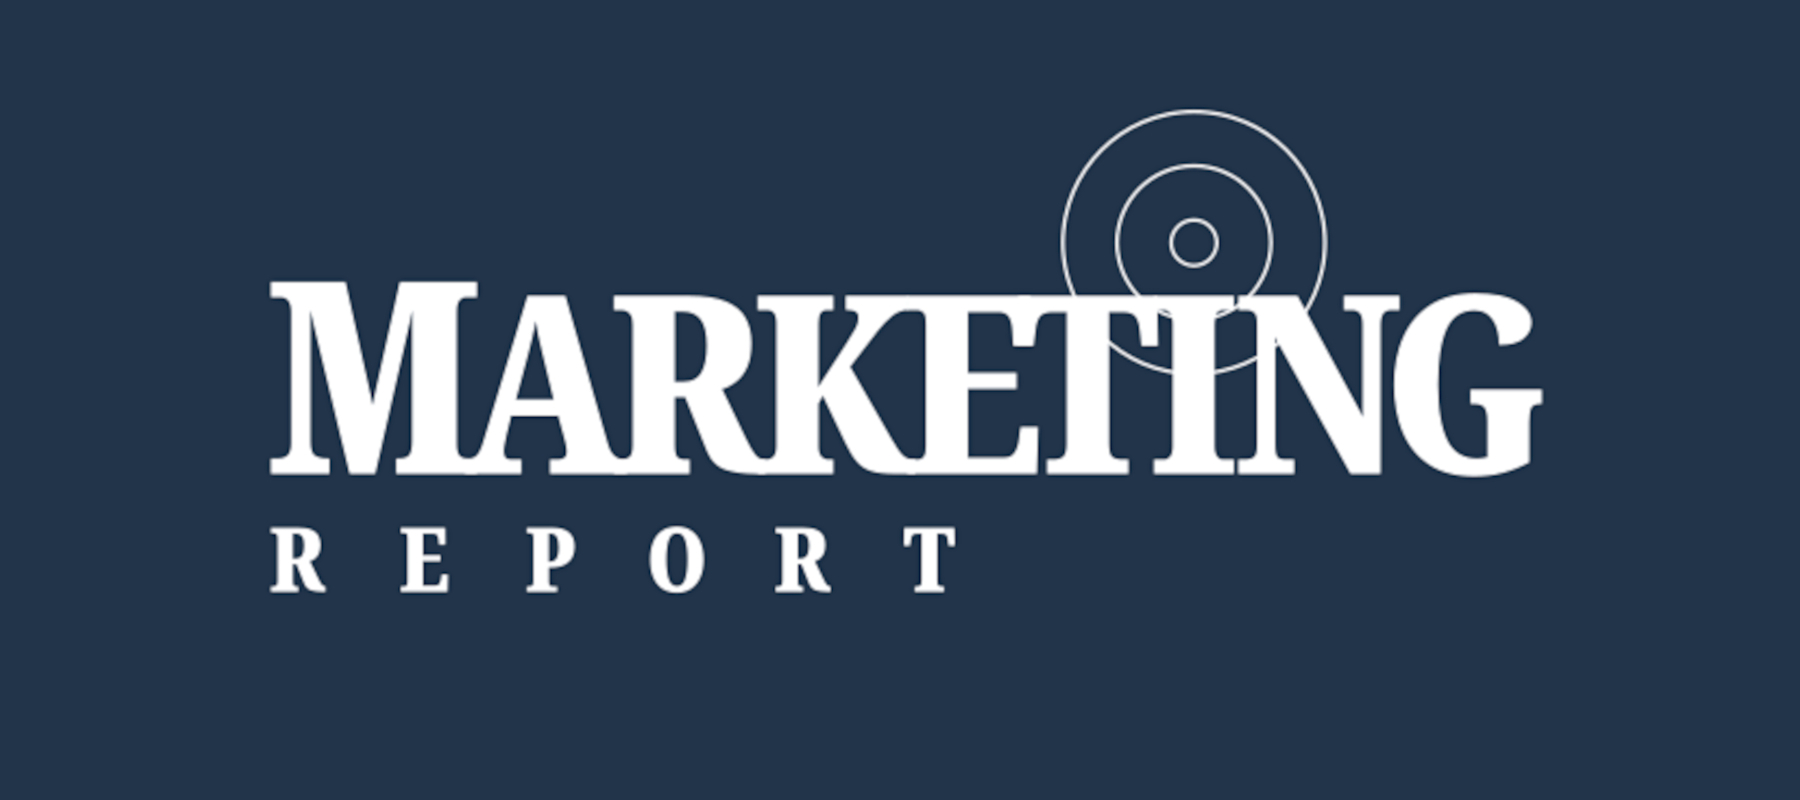 Marketing Report is looking for columnists